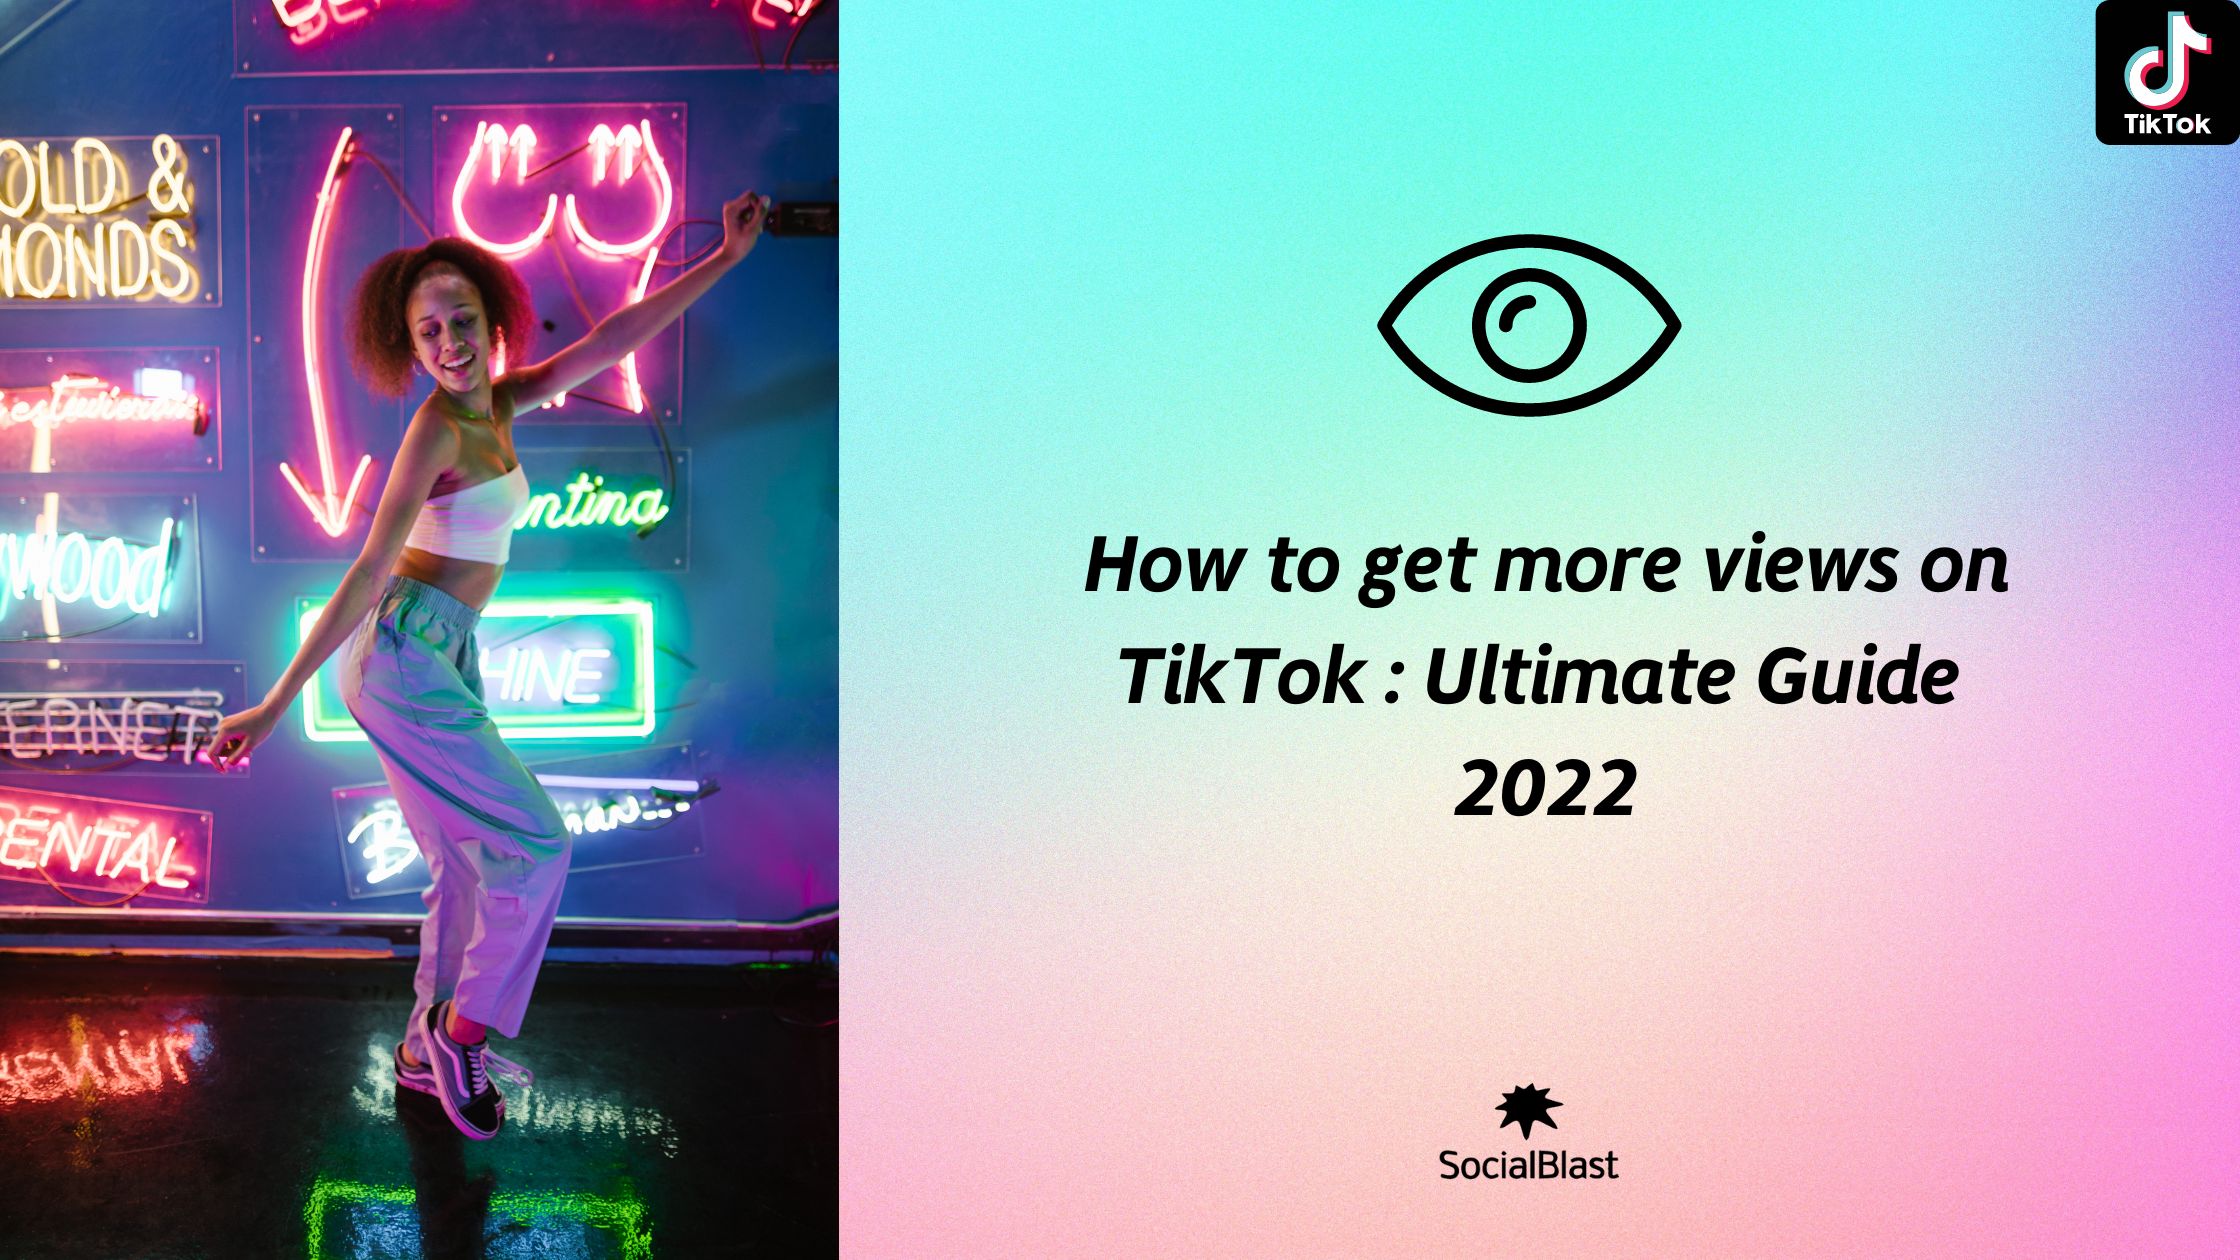 How to get more views on Tiktok : Ultimate Guide 2022